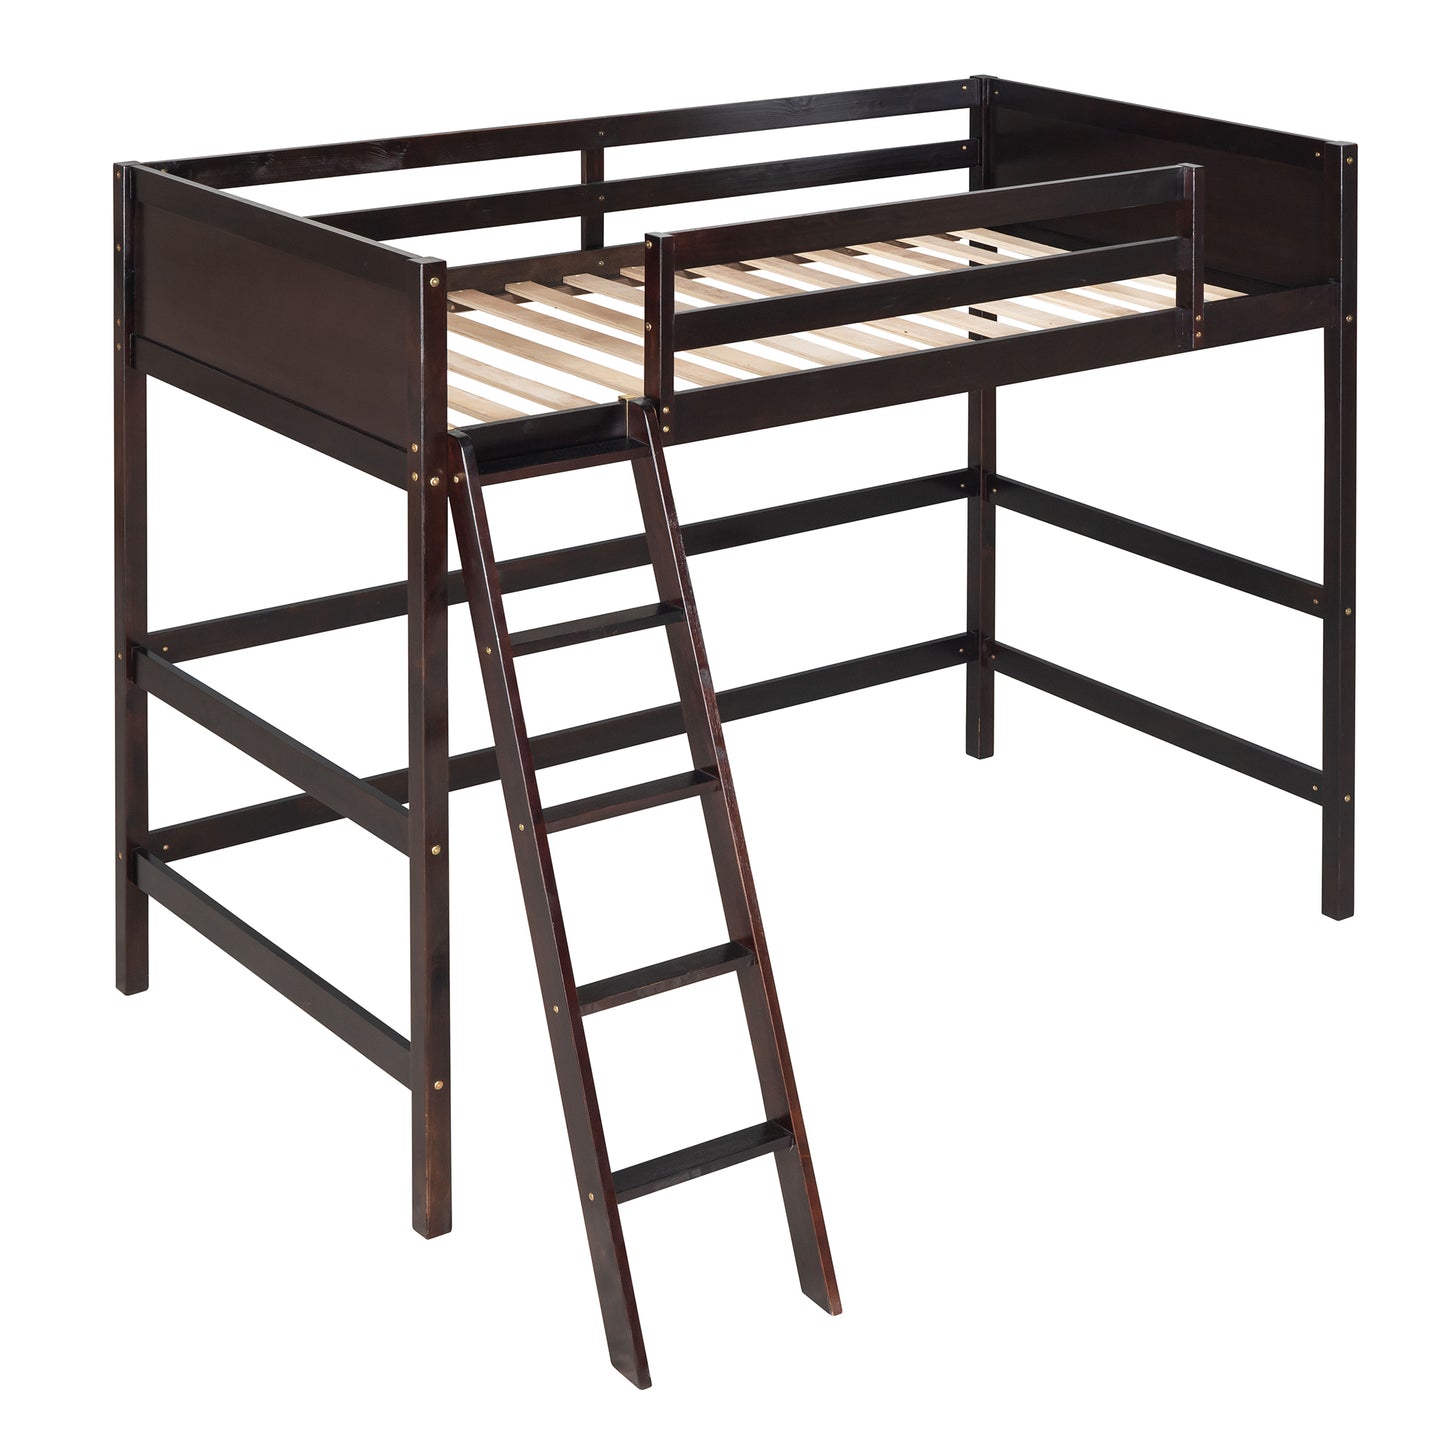 Solid Wood Twin Size Loft Bed with Ladder(Espresso)